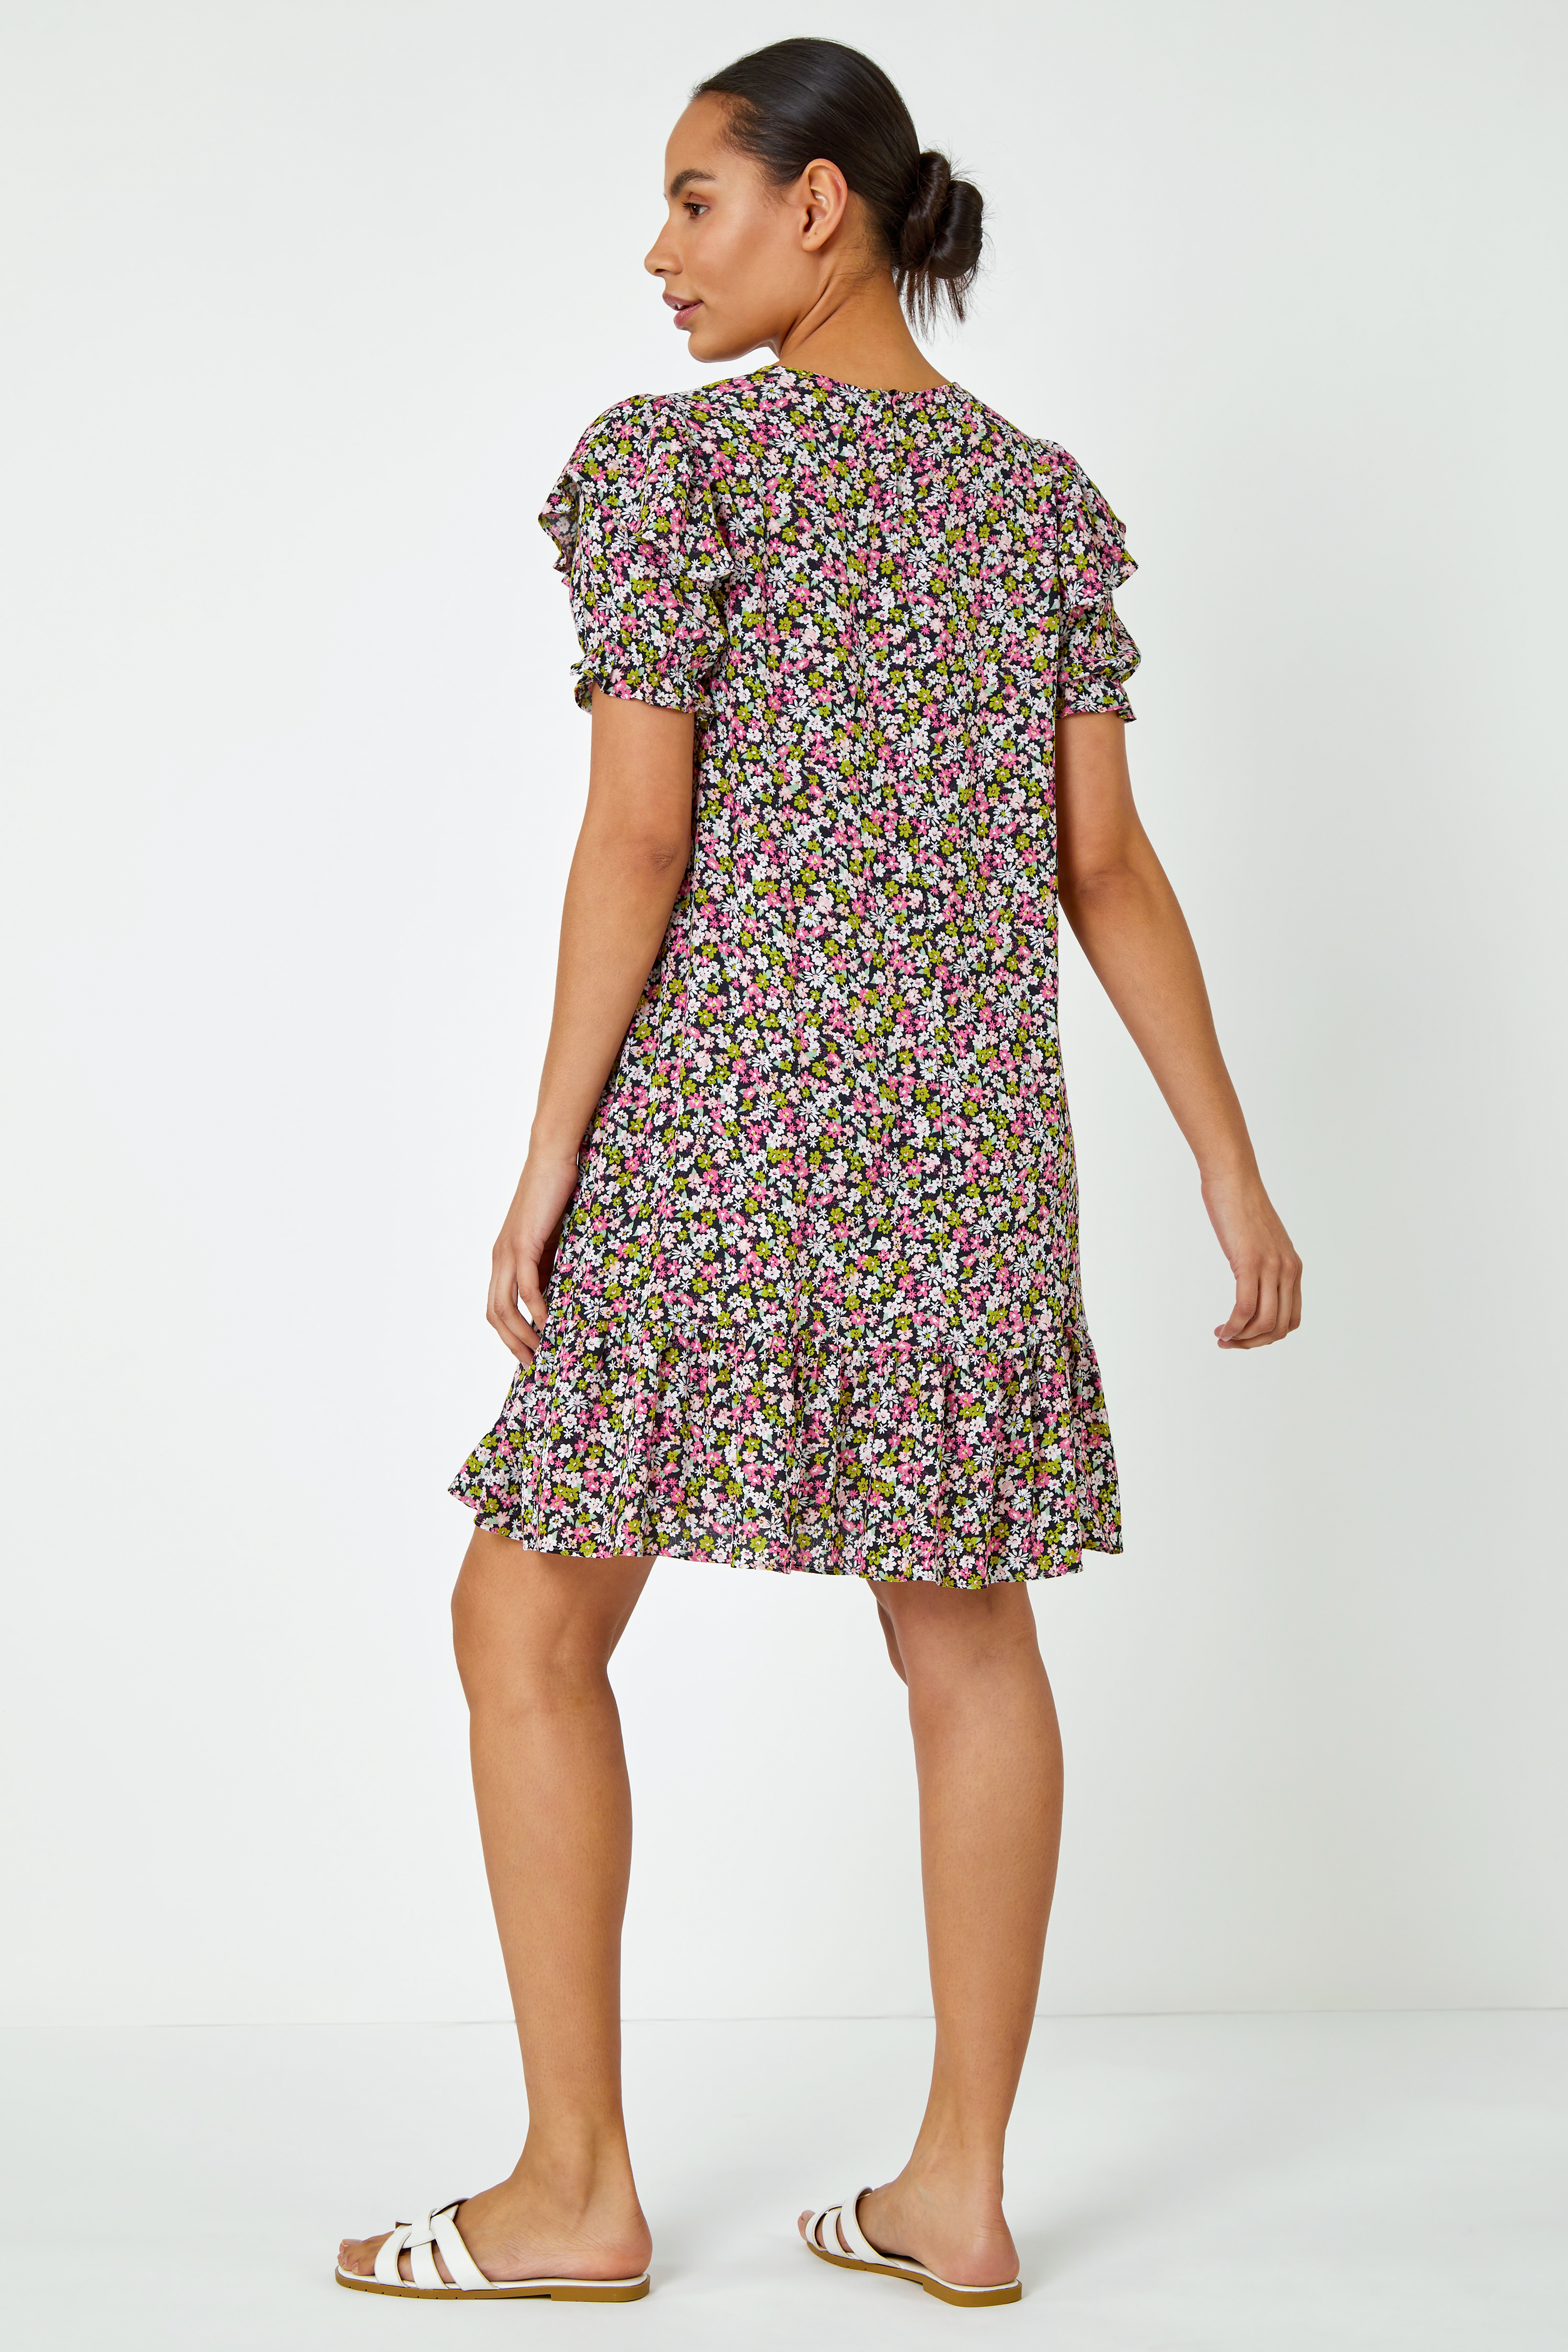 PINK Ditsy Floral Frill Detail Dress, Image 4 of 5